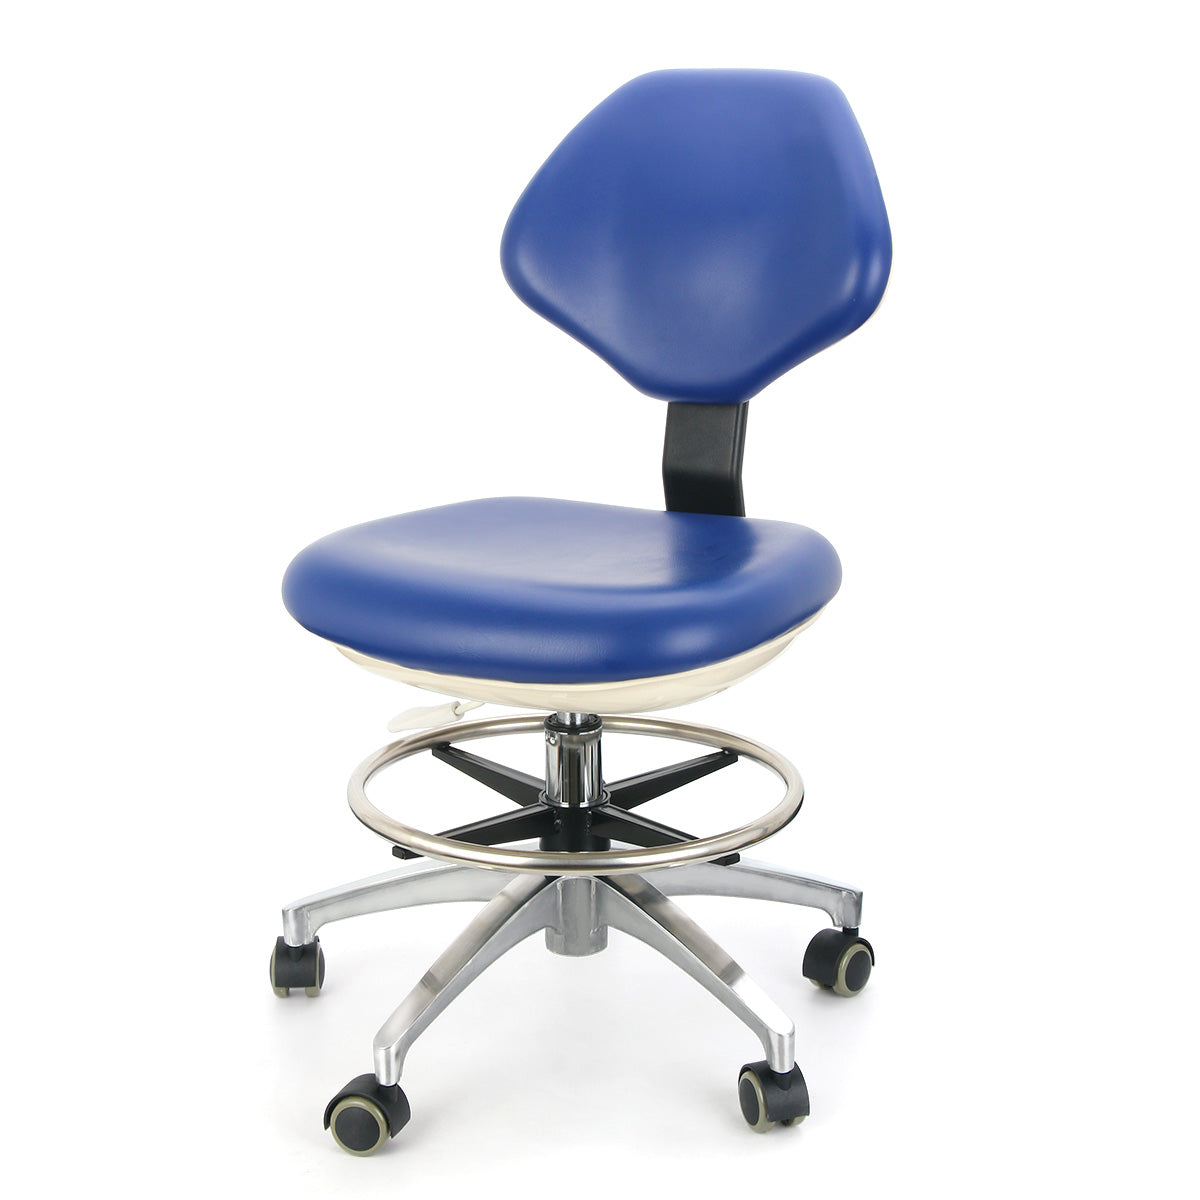 Dental Doctor Stool With Adjustable Seat And Backrest 360-Degree Rotated Blue Color - pairaydental.com